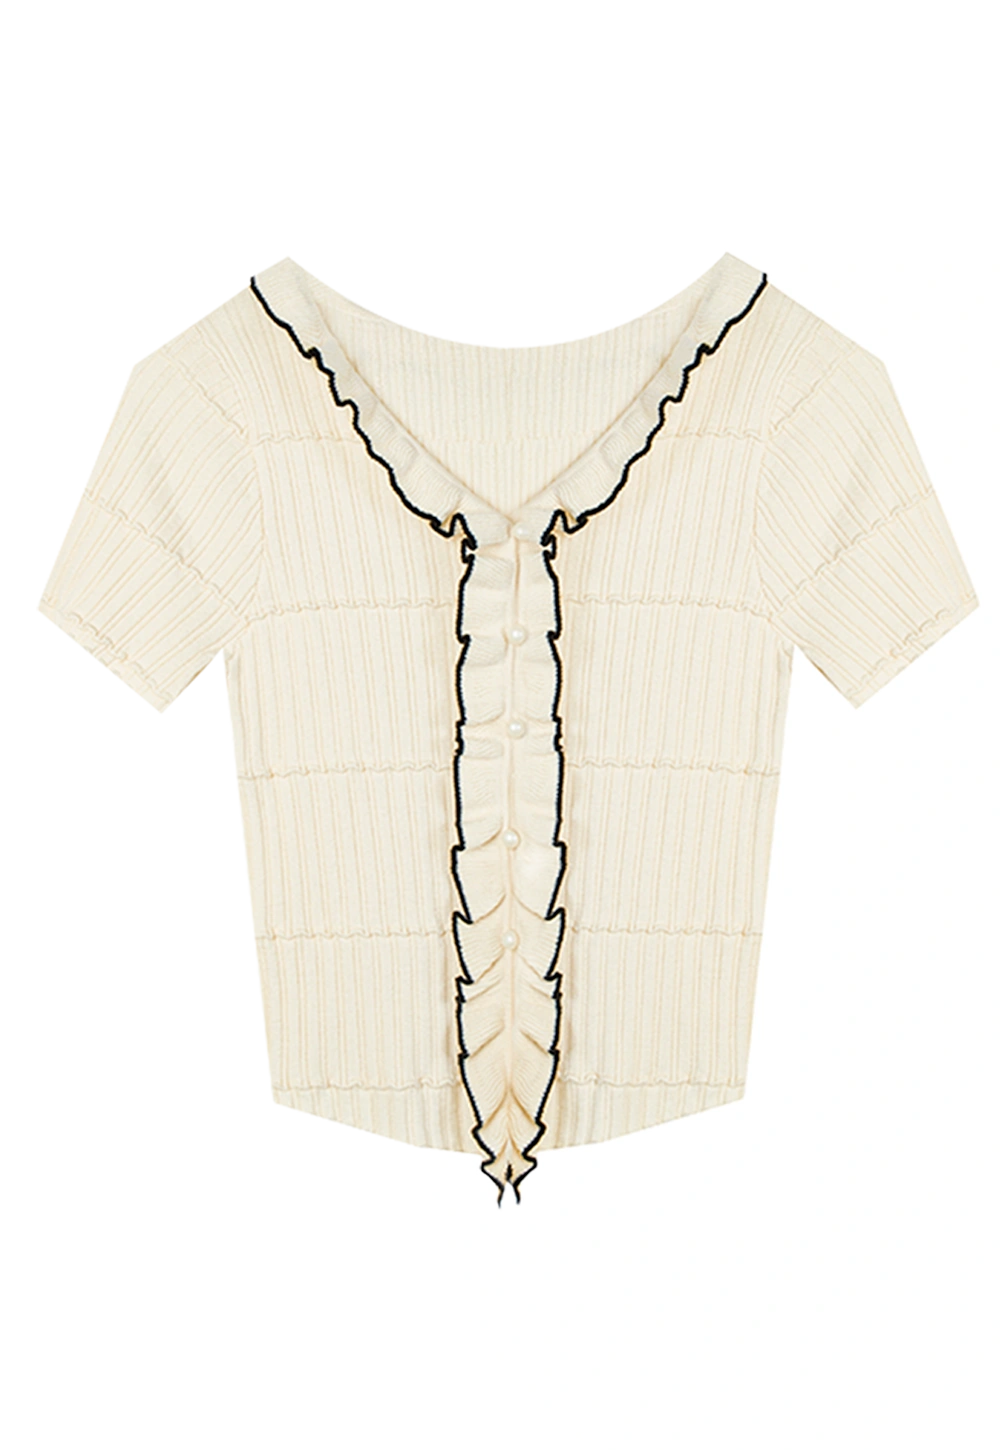 Women's Chic Cream Knit Top with Black Scalloped Trim and Pearl Buttons